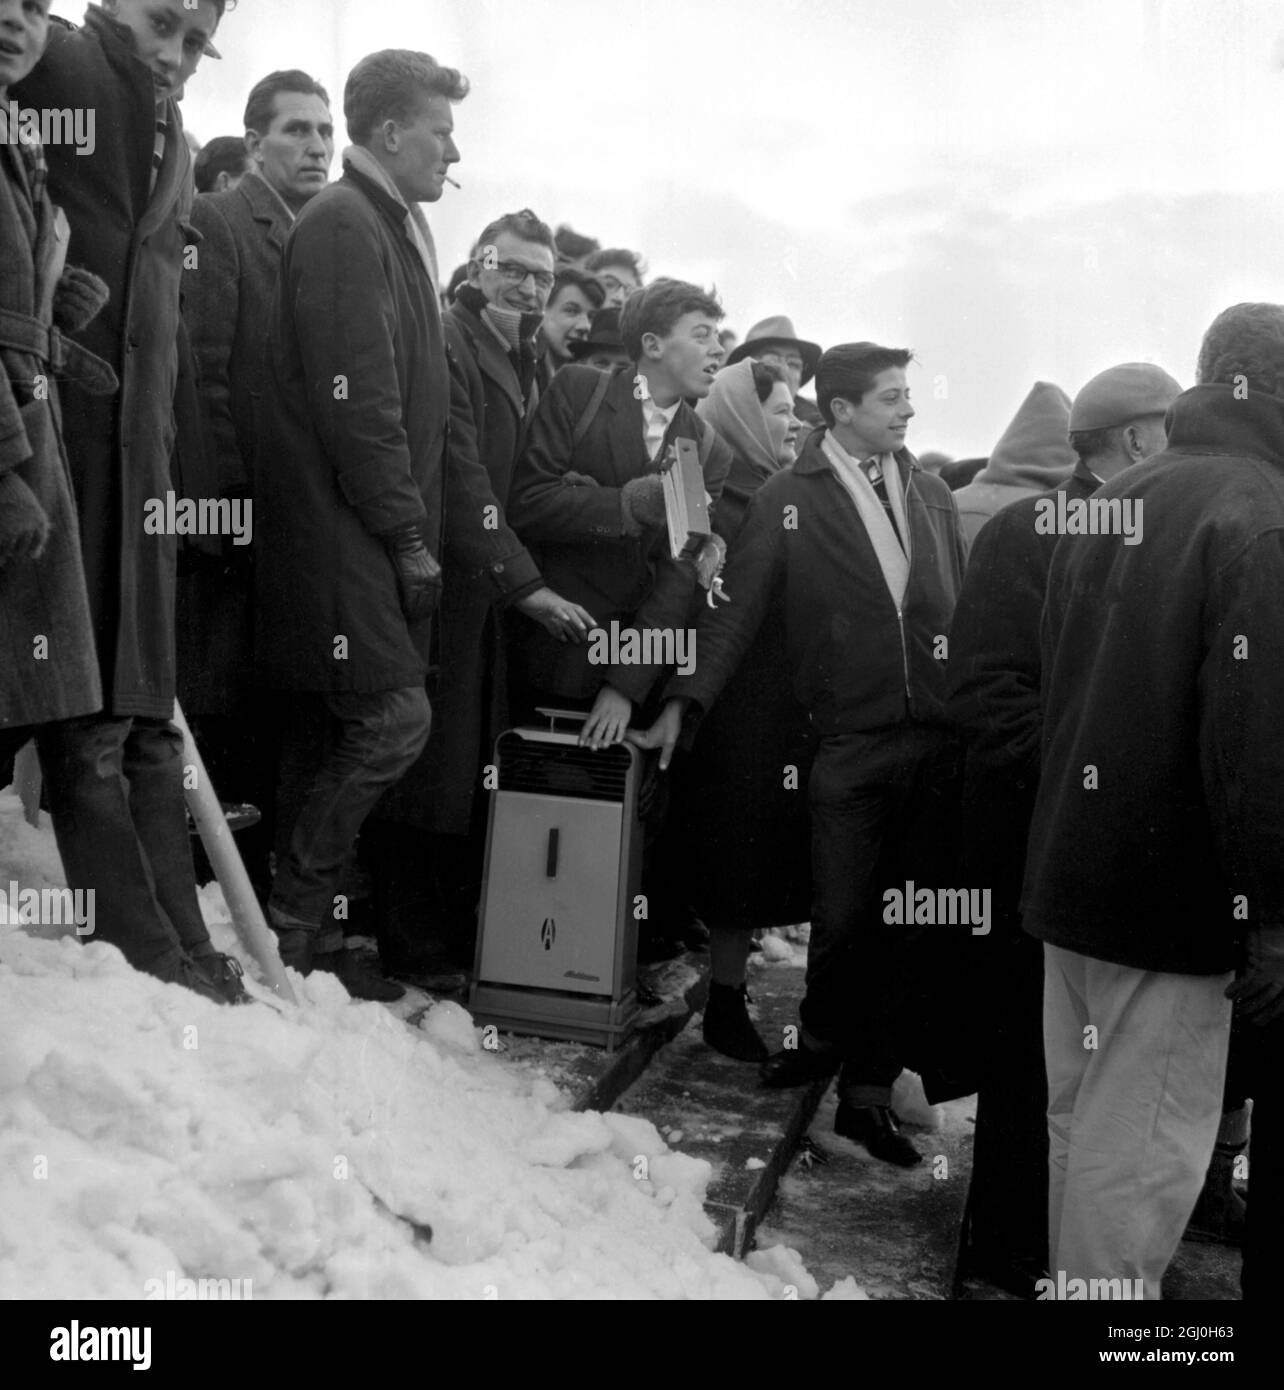 Brighton, England: These Brighton fans took along an oil heater to keeep warm amongst the snow as they watched Brighton V. Crystal Palace. Brighton lost 1 - 2. 12 January 1963 Stock Photo